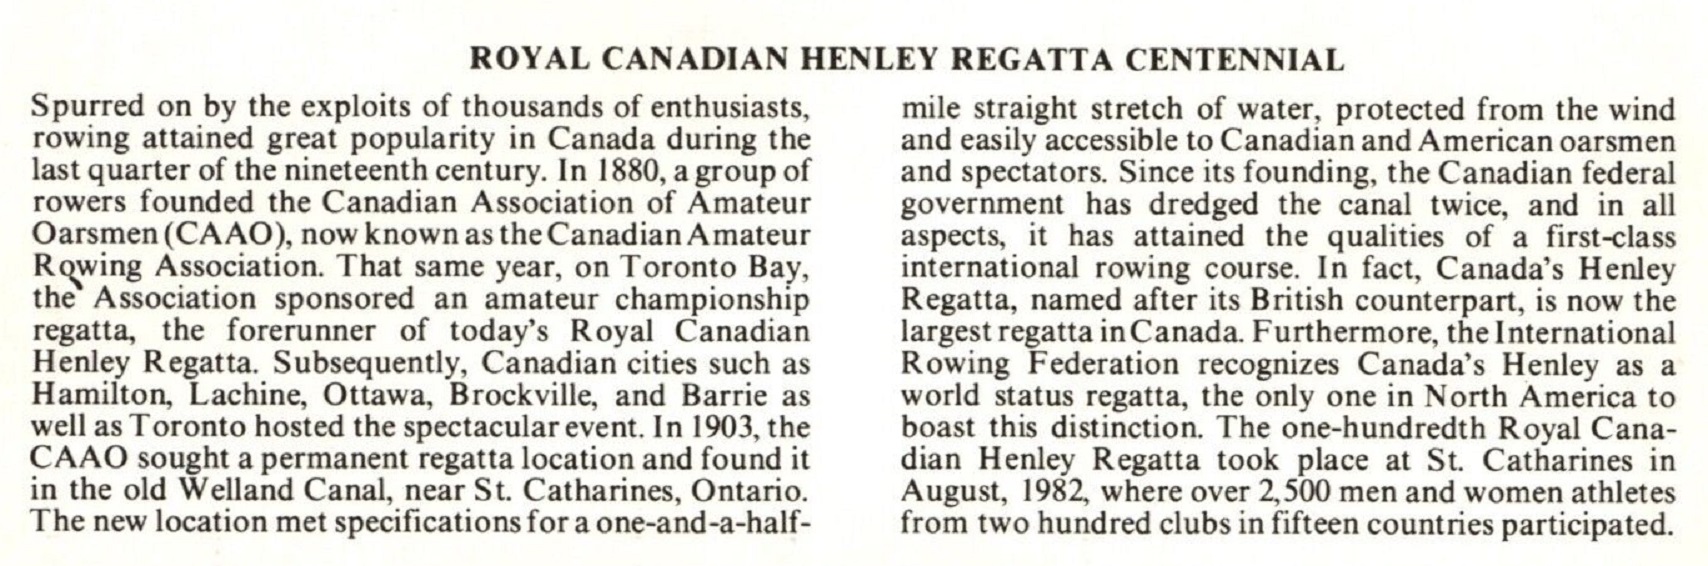 FDC CAN 1982 Aug. 4th Royal Canadian Henley Regatta reverse